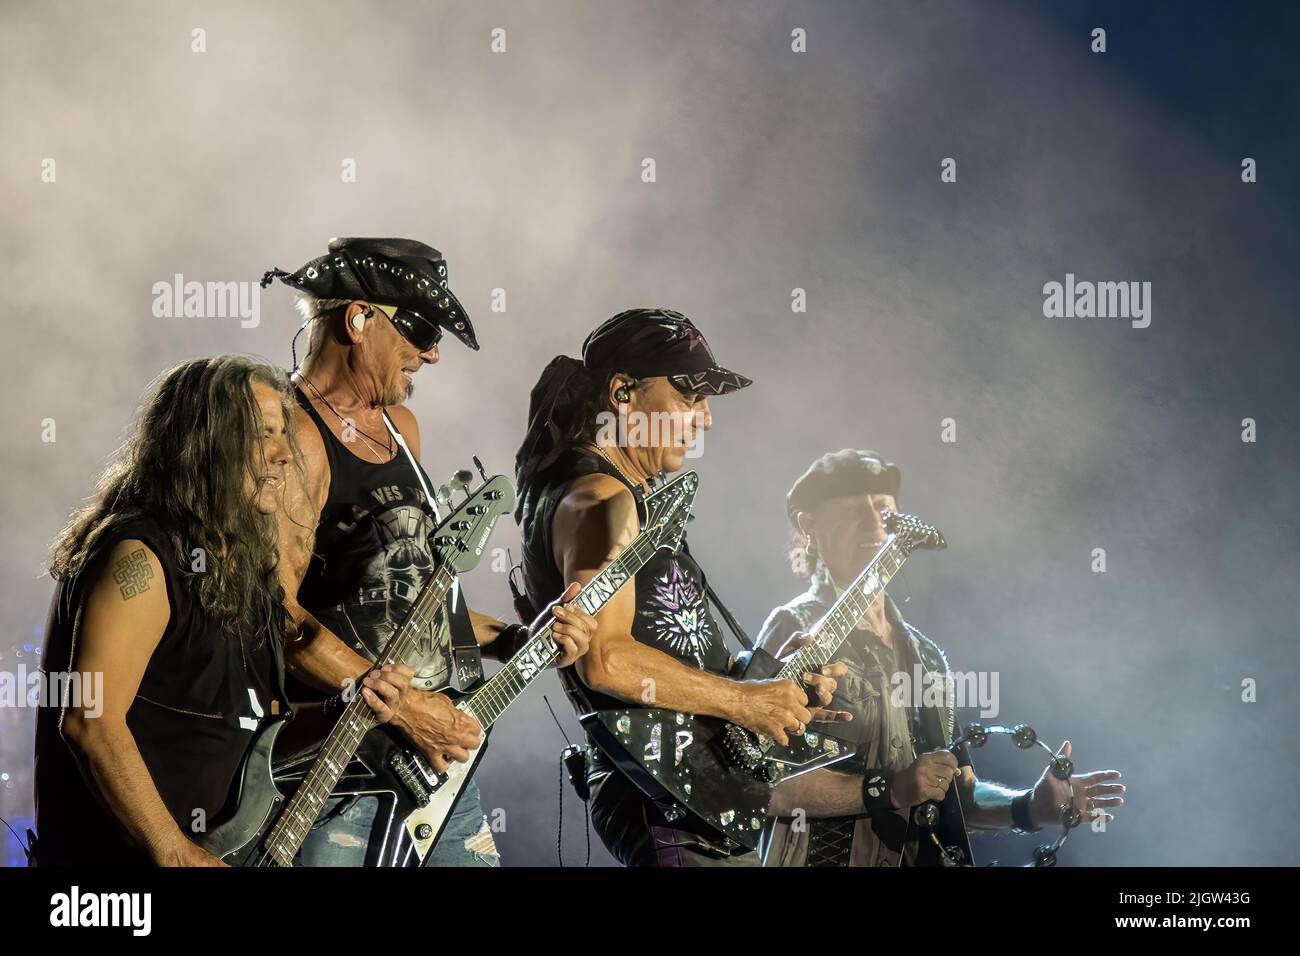 Athens, Greece 6 July 2022. Scorpions rock band close up view on stage in Greece. Stock Photo